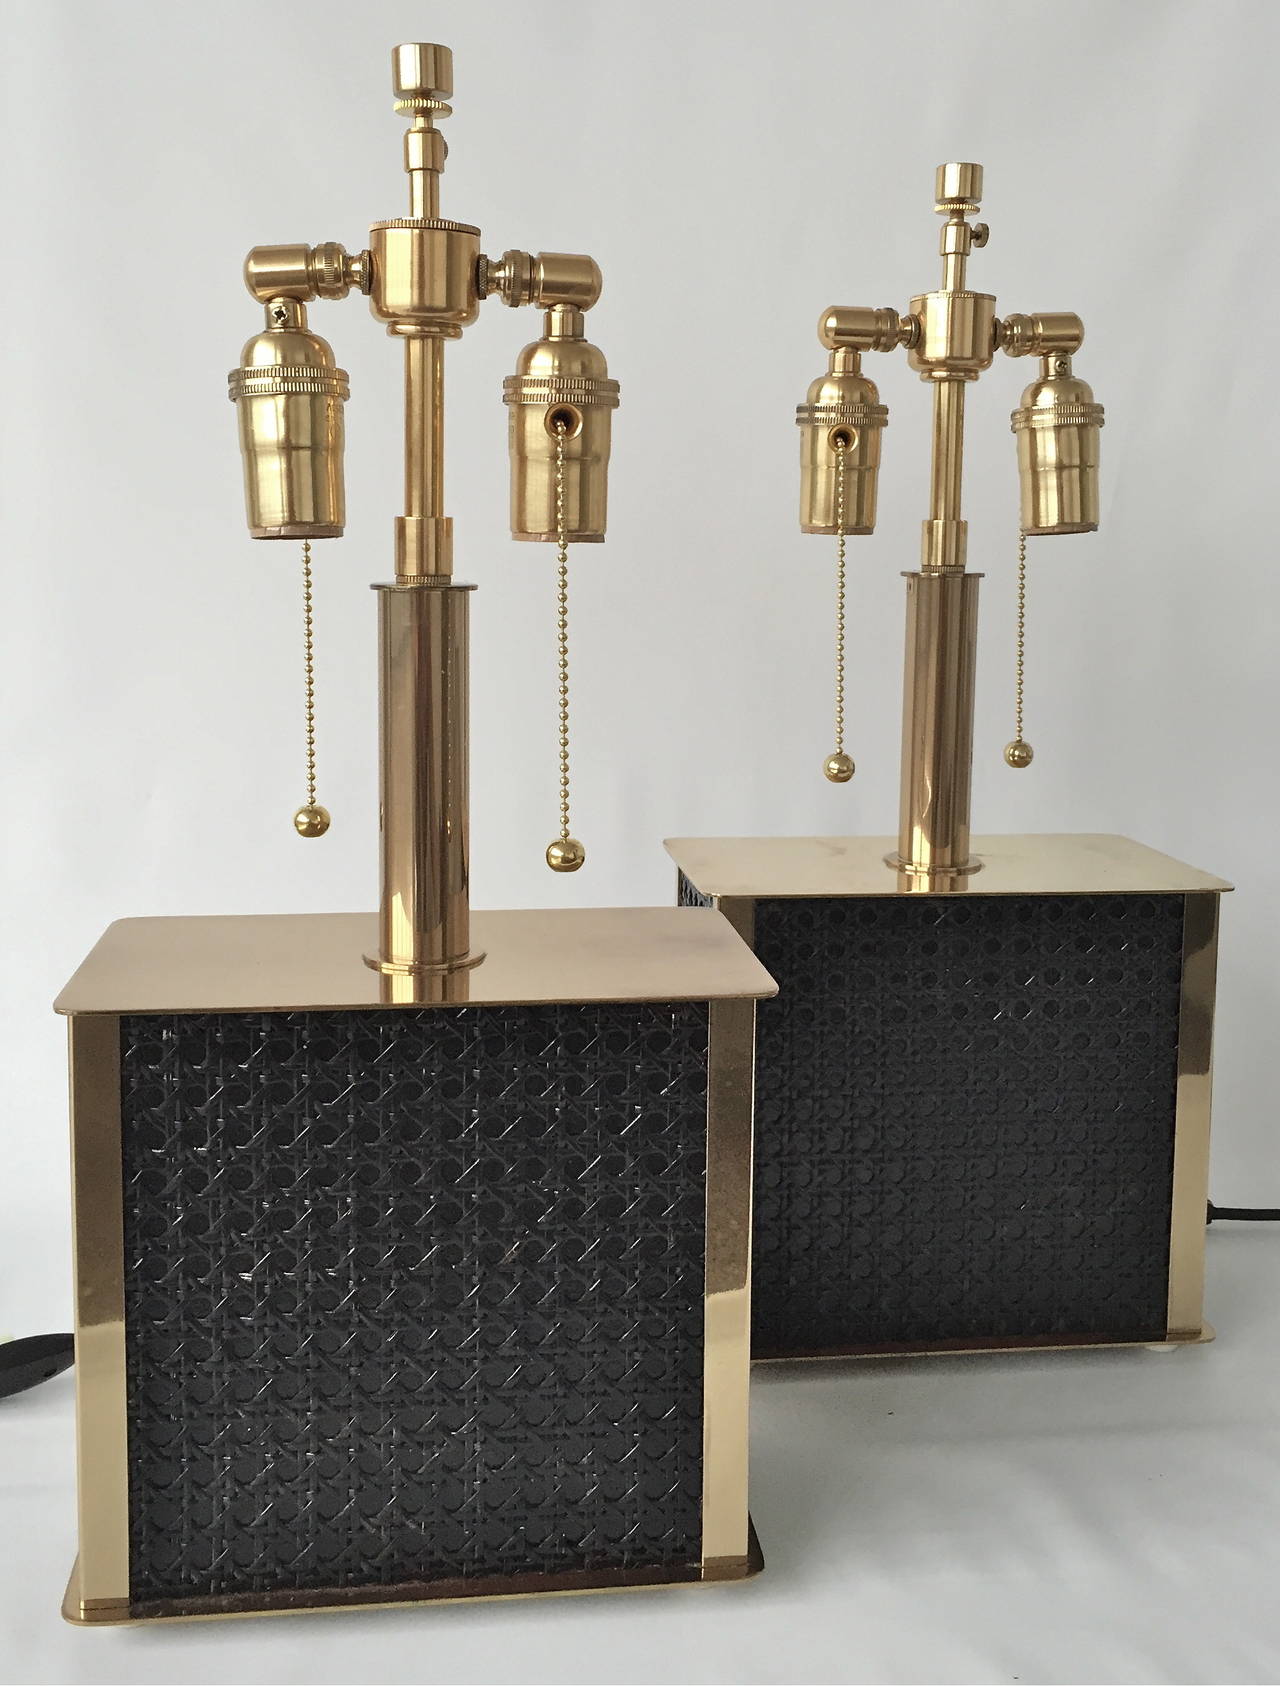 A pair of Swedish table lamps, circa mid-20th century.
 Marked: Bergboms B-55.
Black caned base with polished brass accents.
Newly rewired with black silk cord and matching hardware with adjustable height stem. Measure: Base 8.75